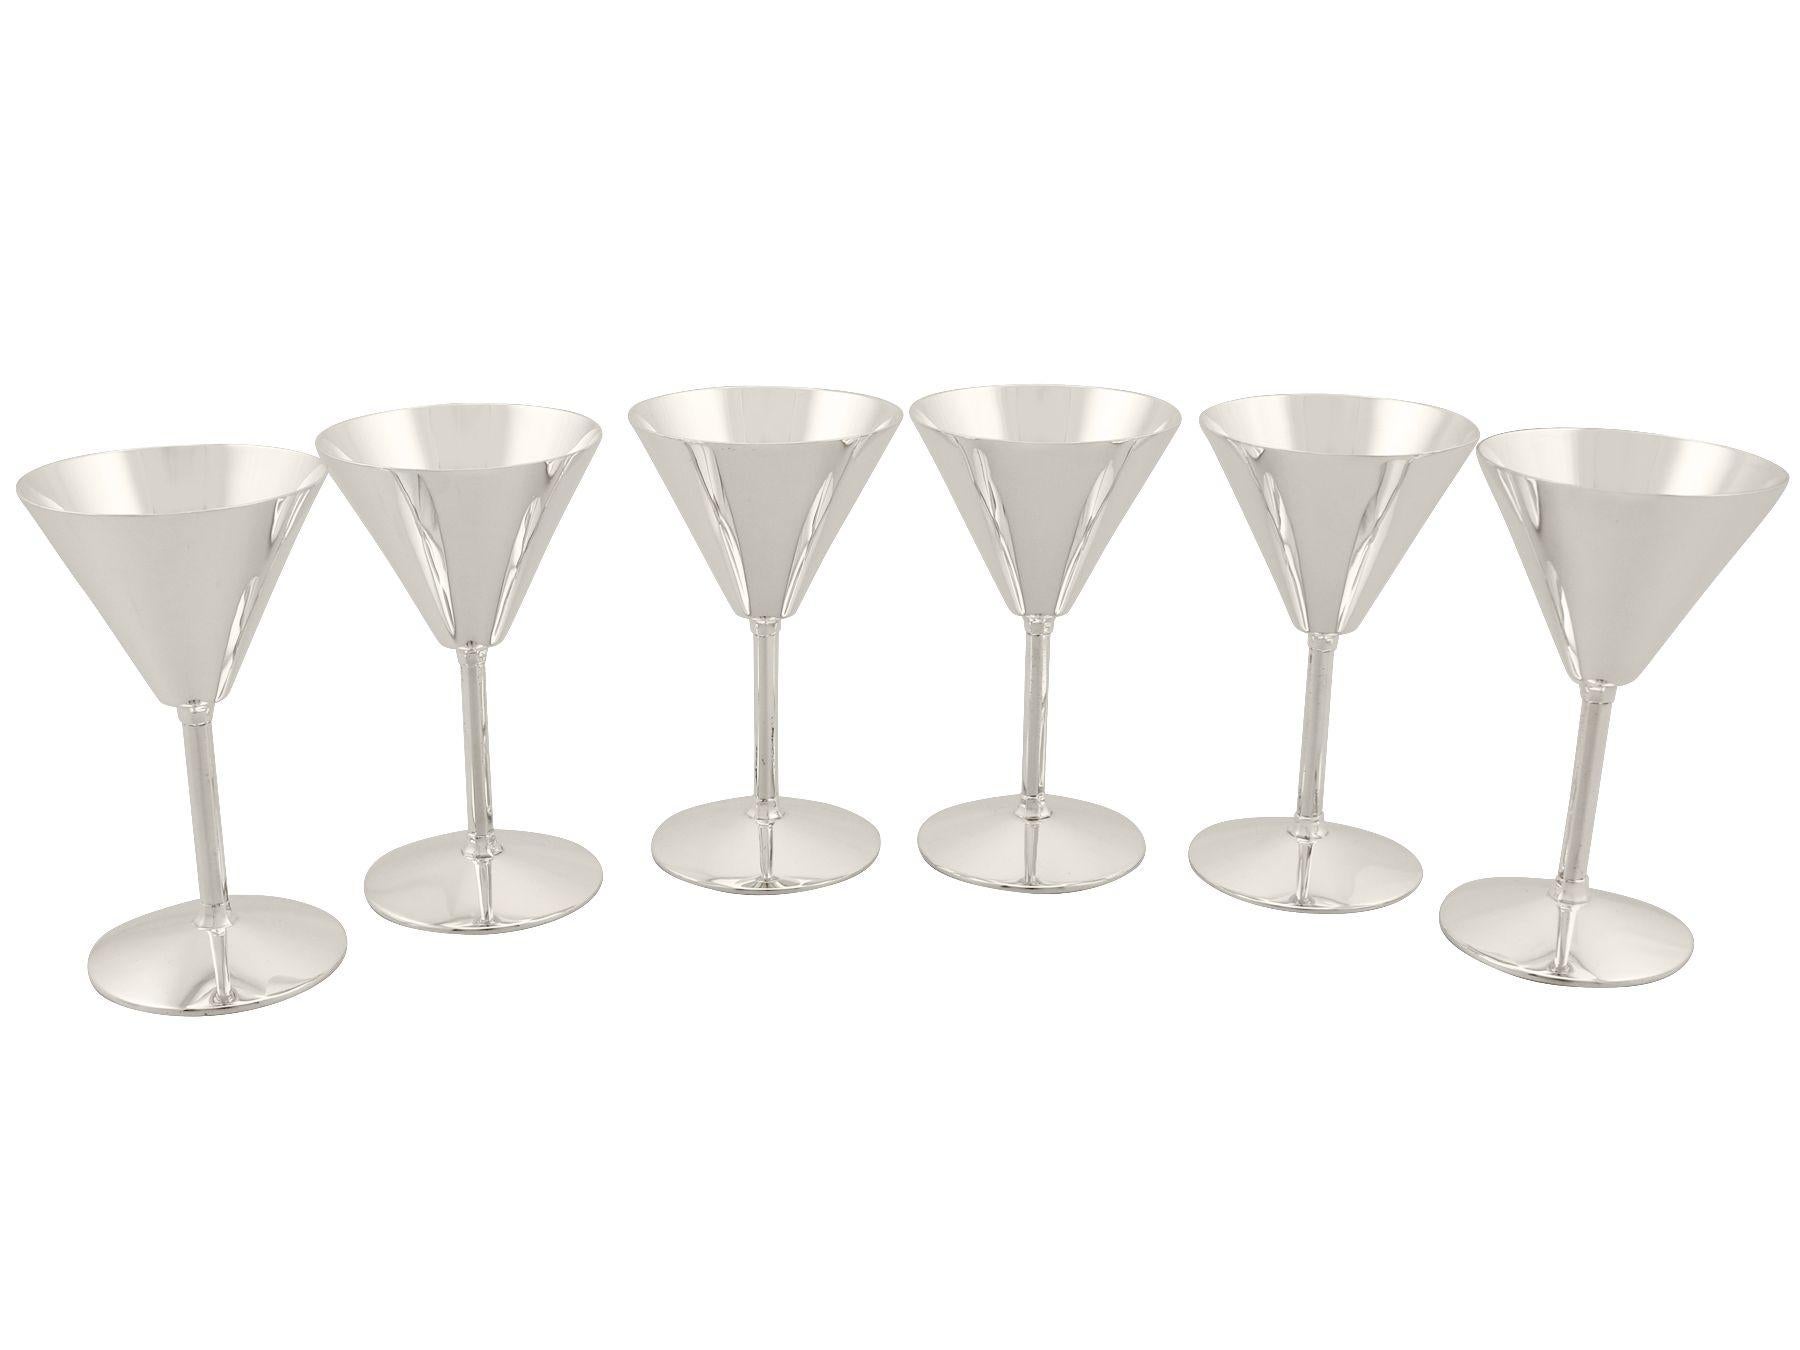 An exceptional, fine and impressive set of six vintage Elizabeth II English sterling silver cocktail glasses in the Art Deco style; an addition to our range of collectable silverware

These exceptional vintage sterling silver cocktail glasses have a